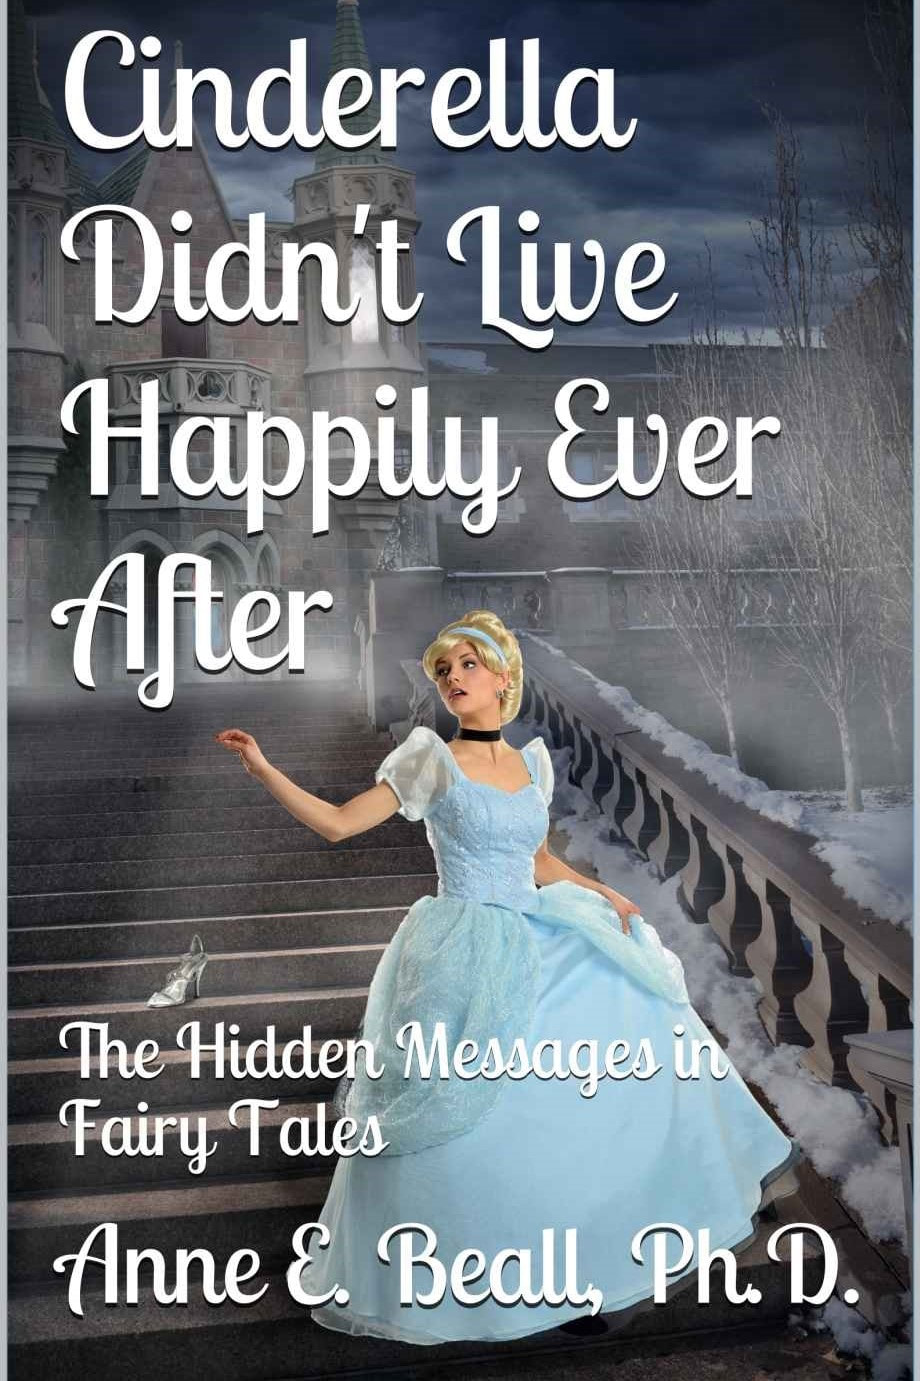 CINDERELLA DIDN'T LIVE HAPPILY EVER AFTER by Anne E. Beall